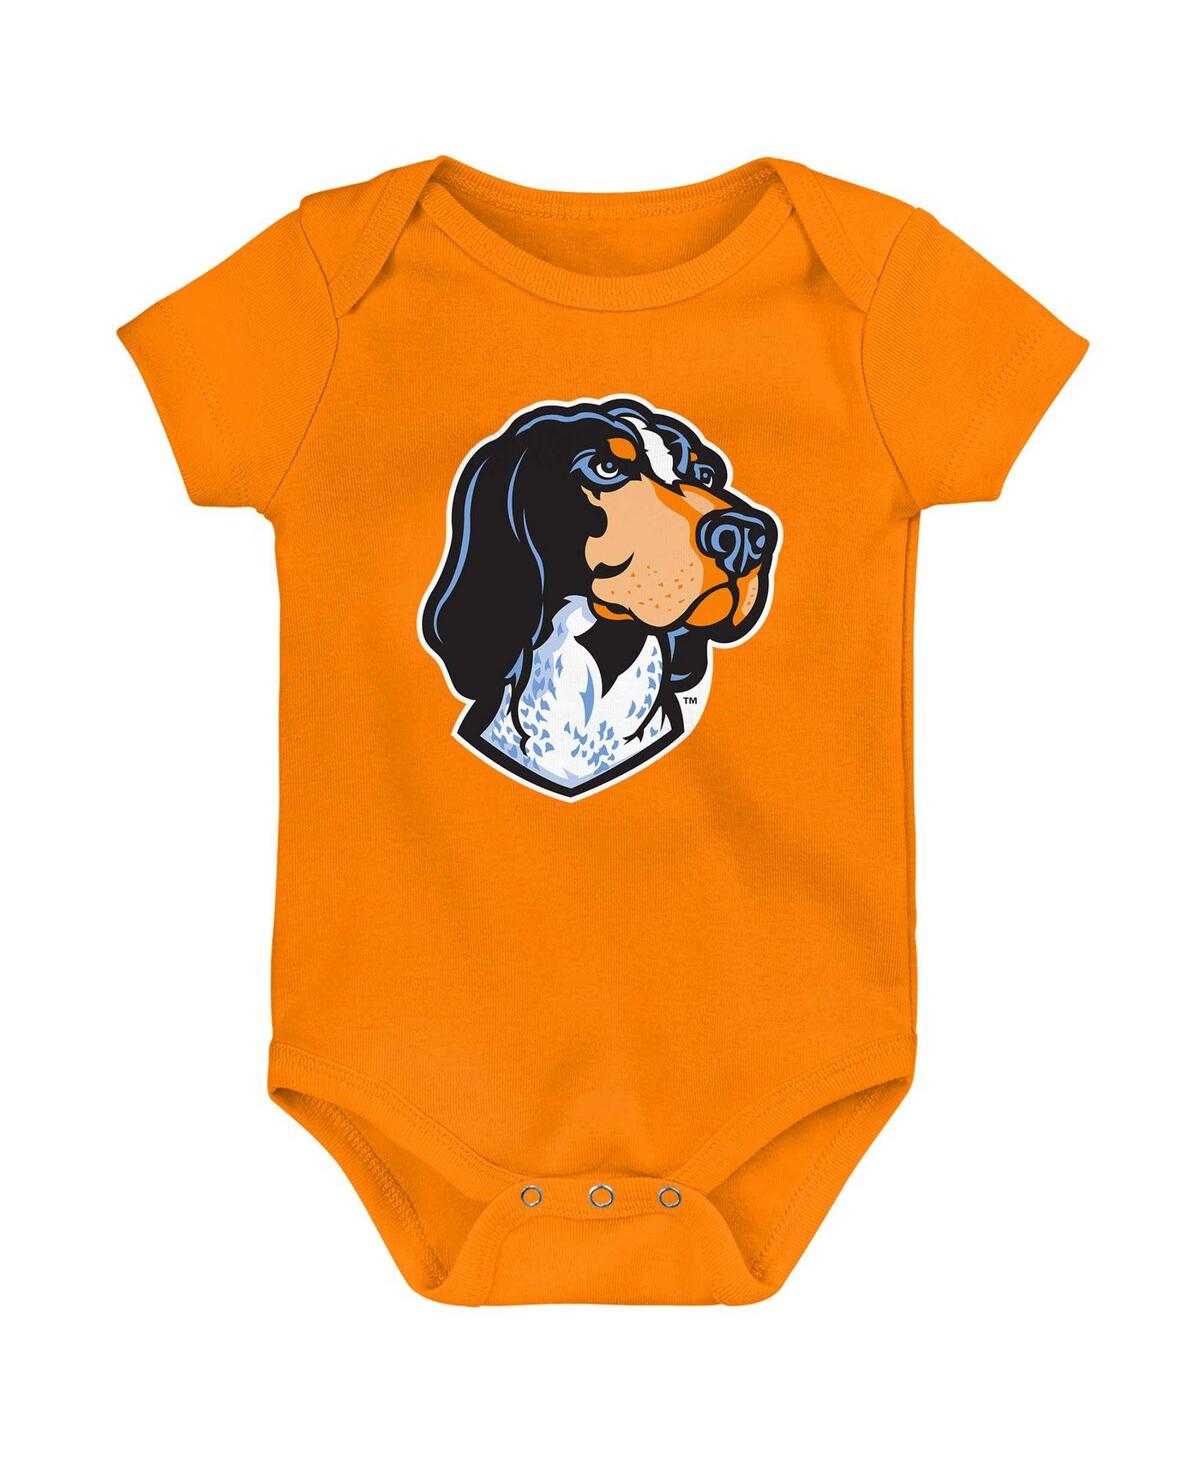 OUTERSTUFF NEWBORN AND INFANT BOYS AND GIRLS TENNESSEE ORANGE TENNESSEE VOLUNTEERS STANDING MASCOT BODYSUIT